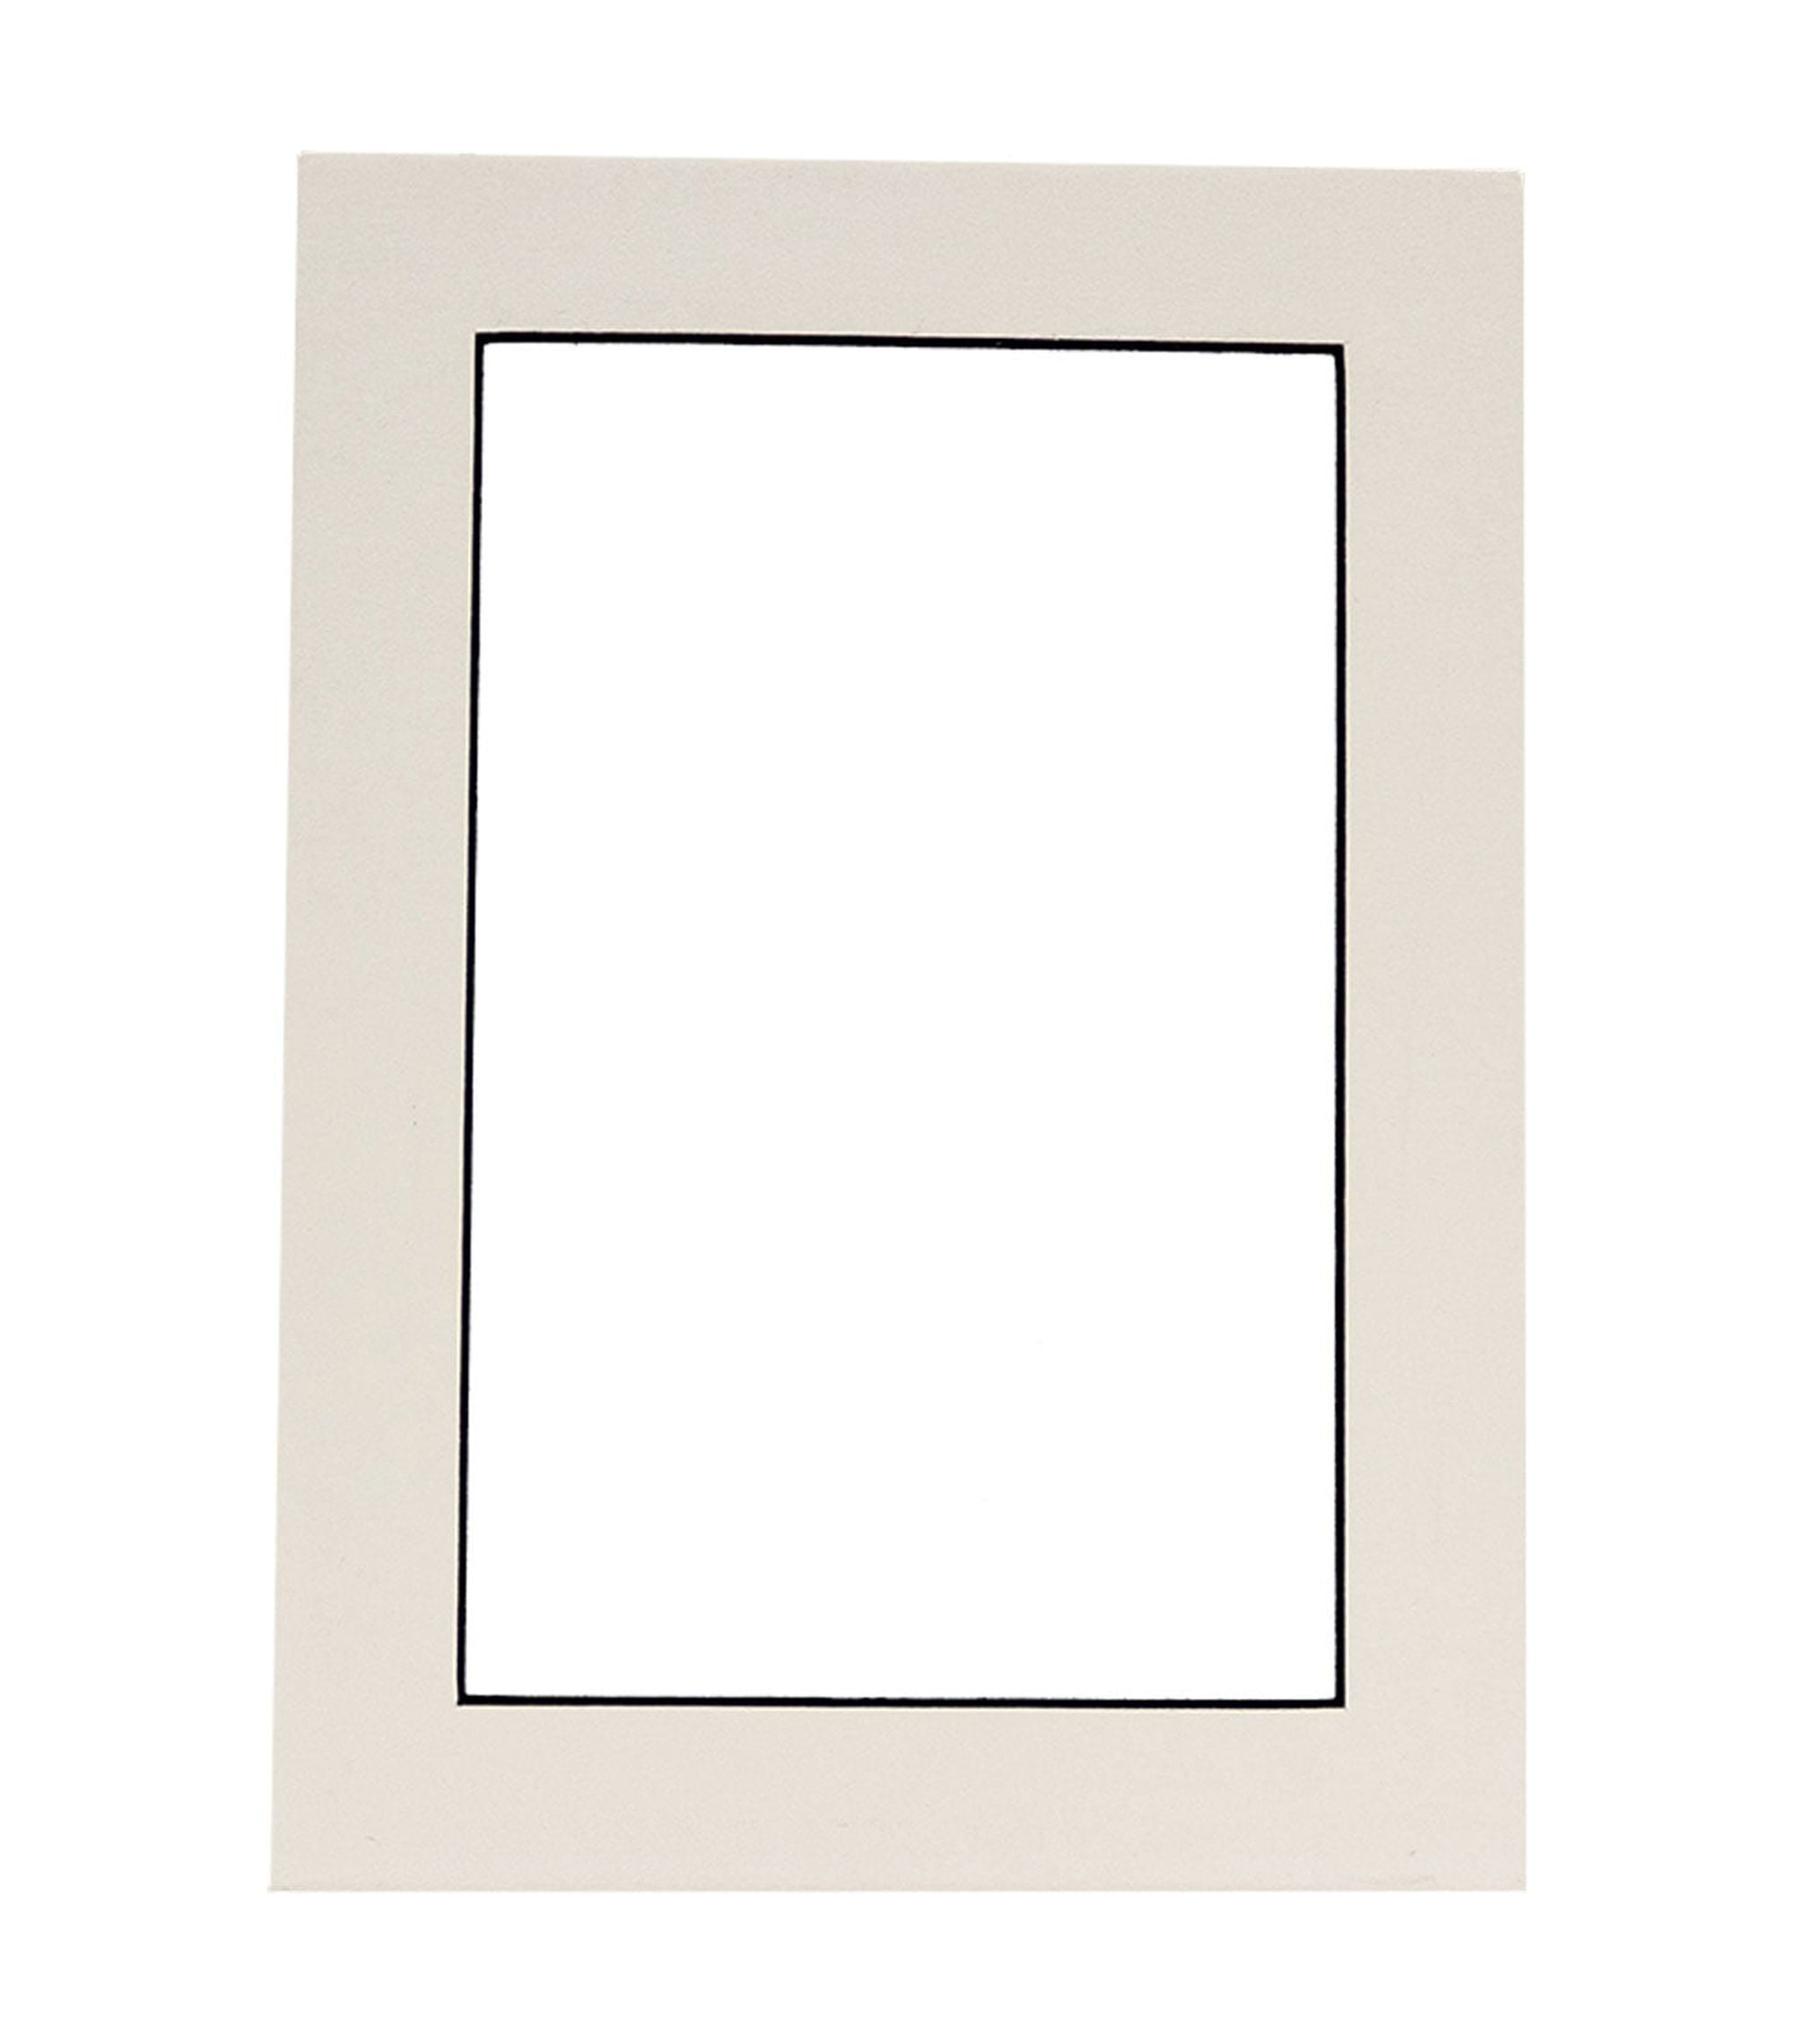 White Photo Mat with Black Core 10x12 for 8x10 Photos - Fits 10x12 Frame